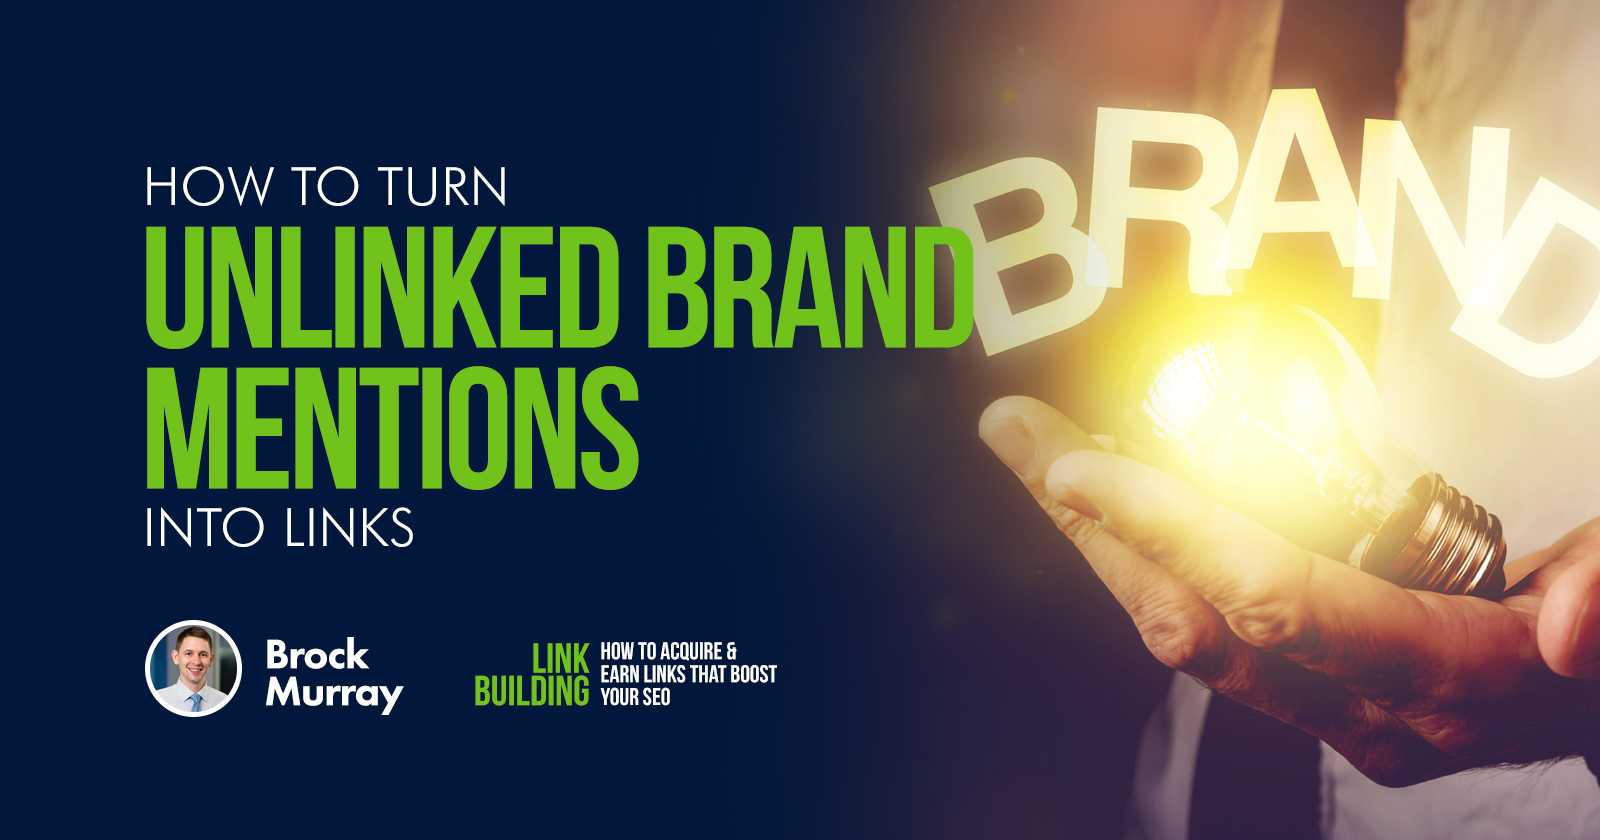 How to Turn Unlinked Brand Mentions Into Links - Brock Murray